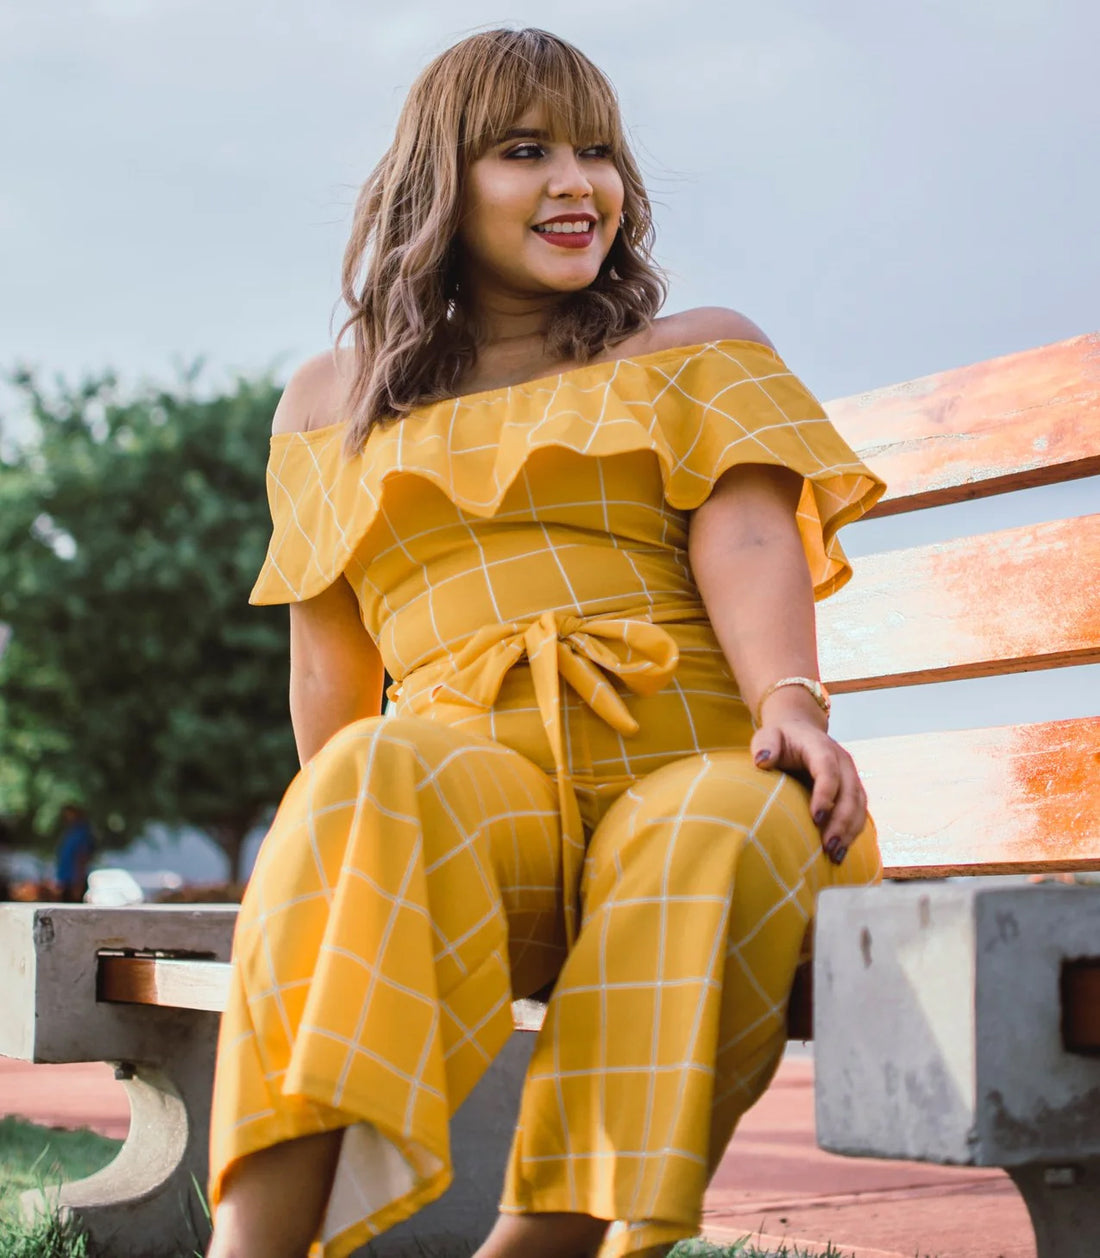 Plus Size: Why You Should Own A Jumpsuit